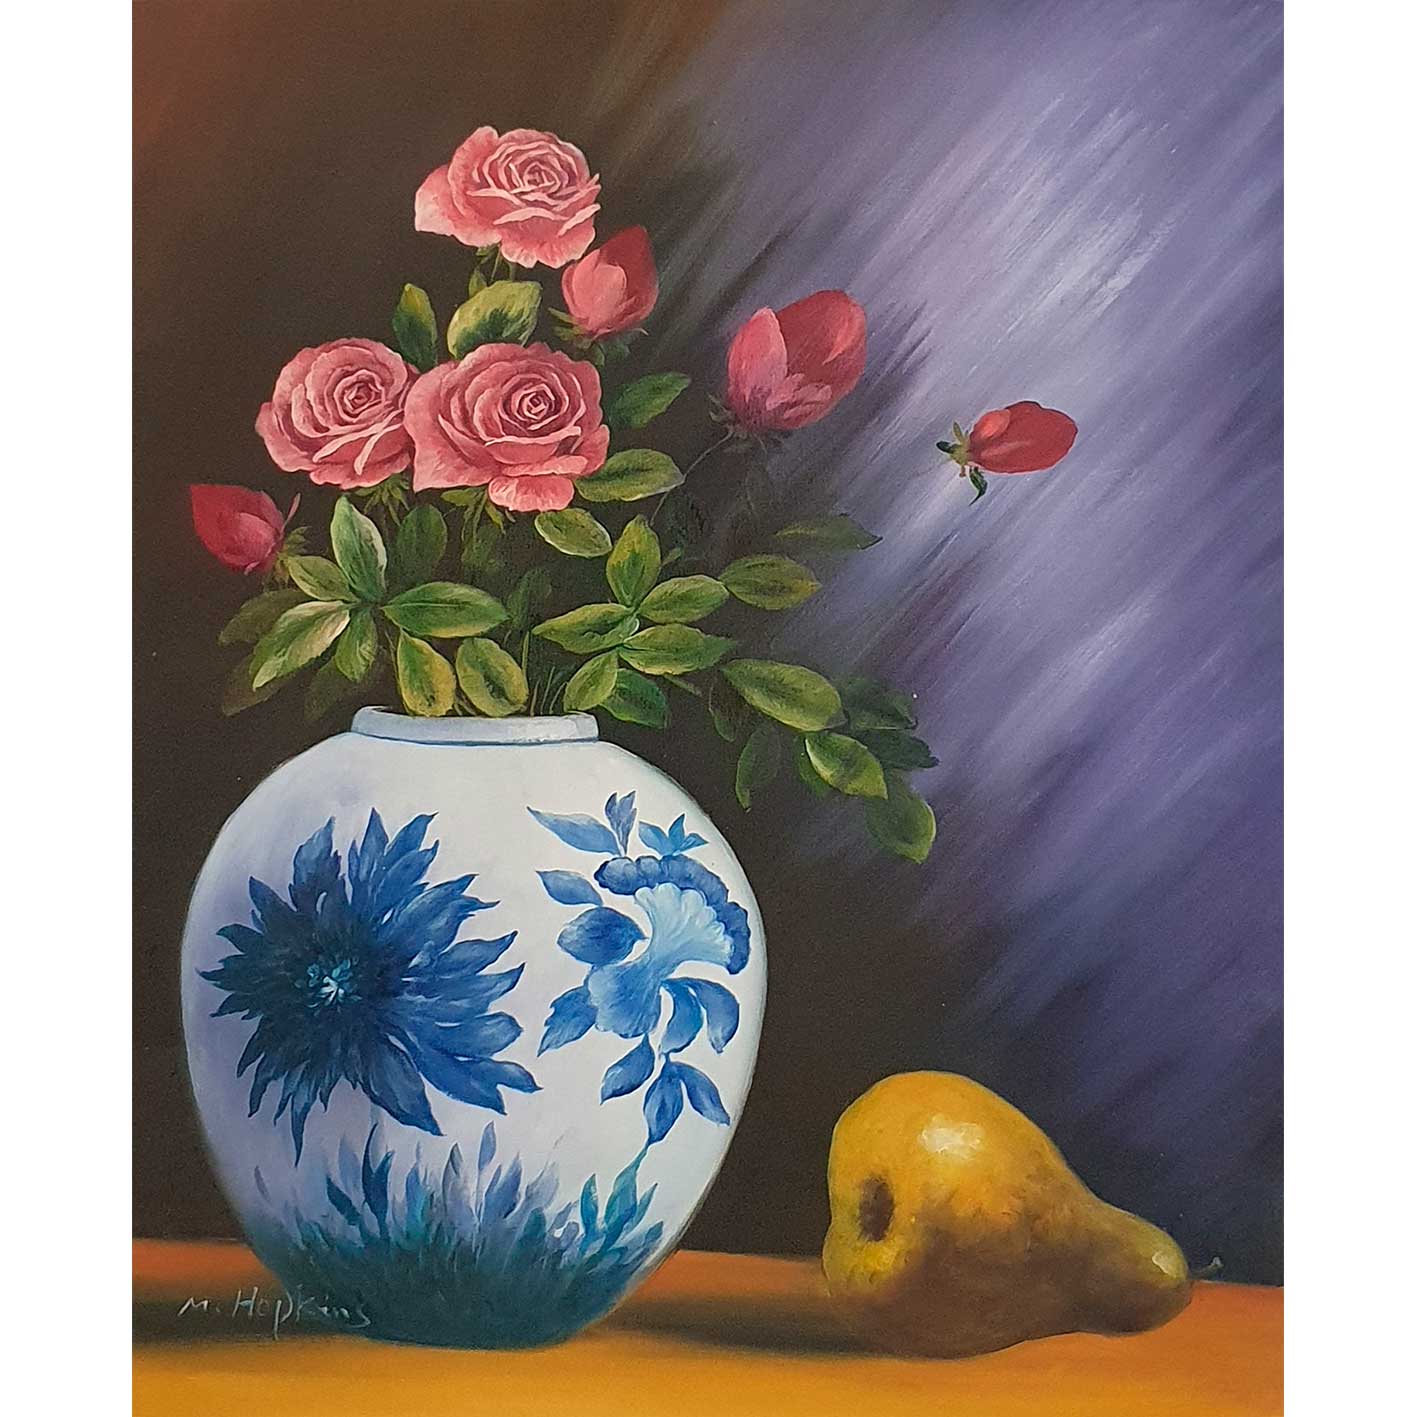 Diptych Painting Flowers Fruit 50x60 cm [2 pieces]